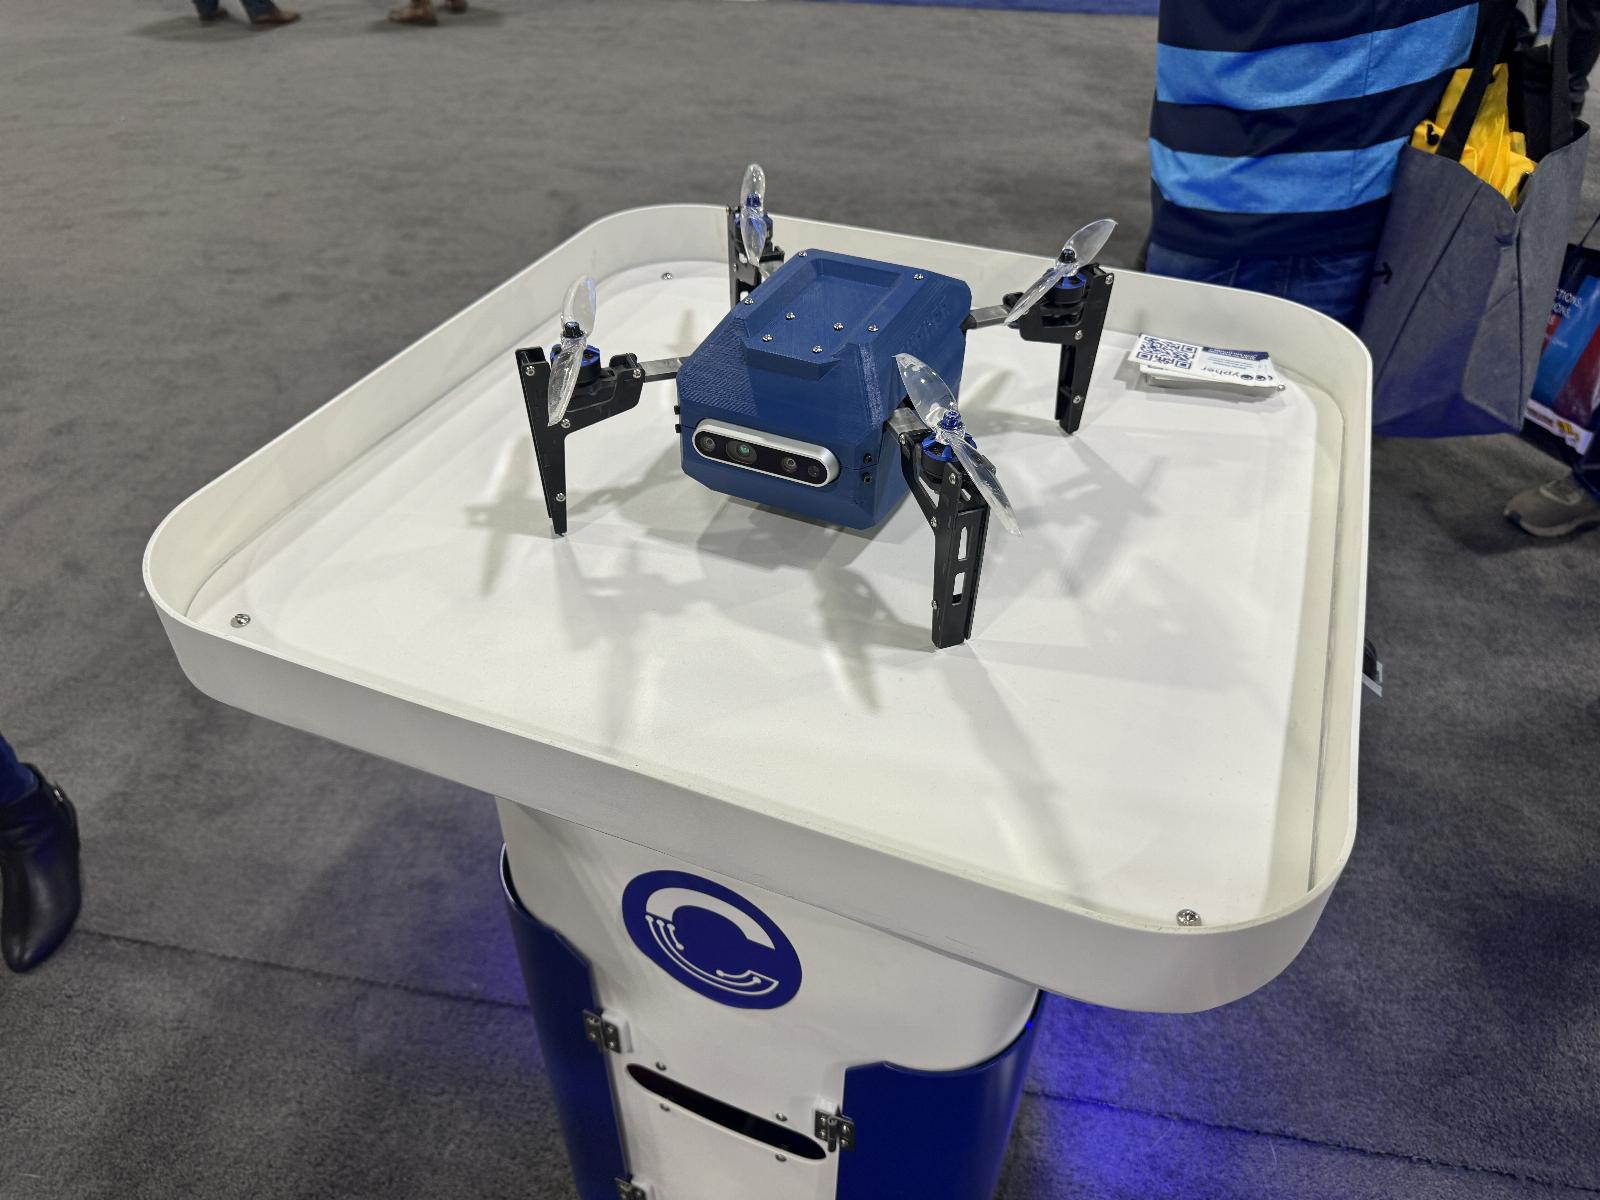 Cypher’s inventory drone launches from an autonomous mobile robot base